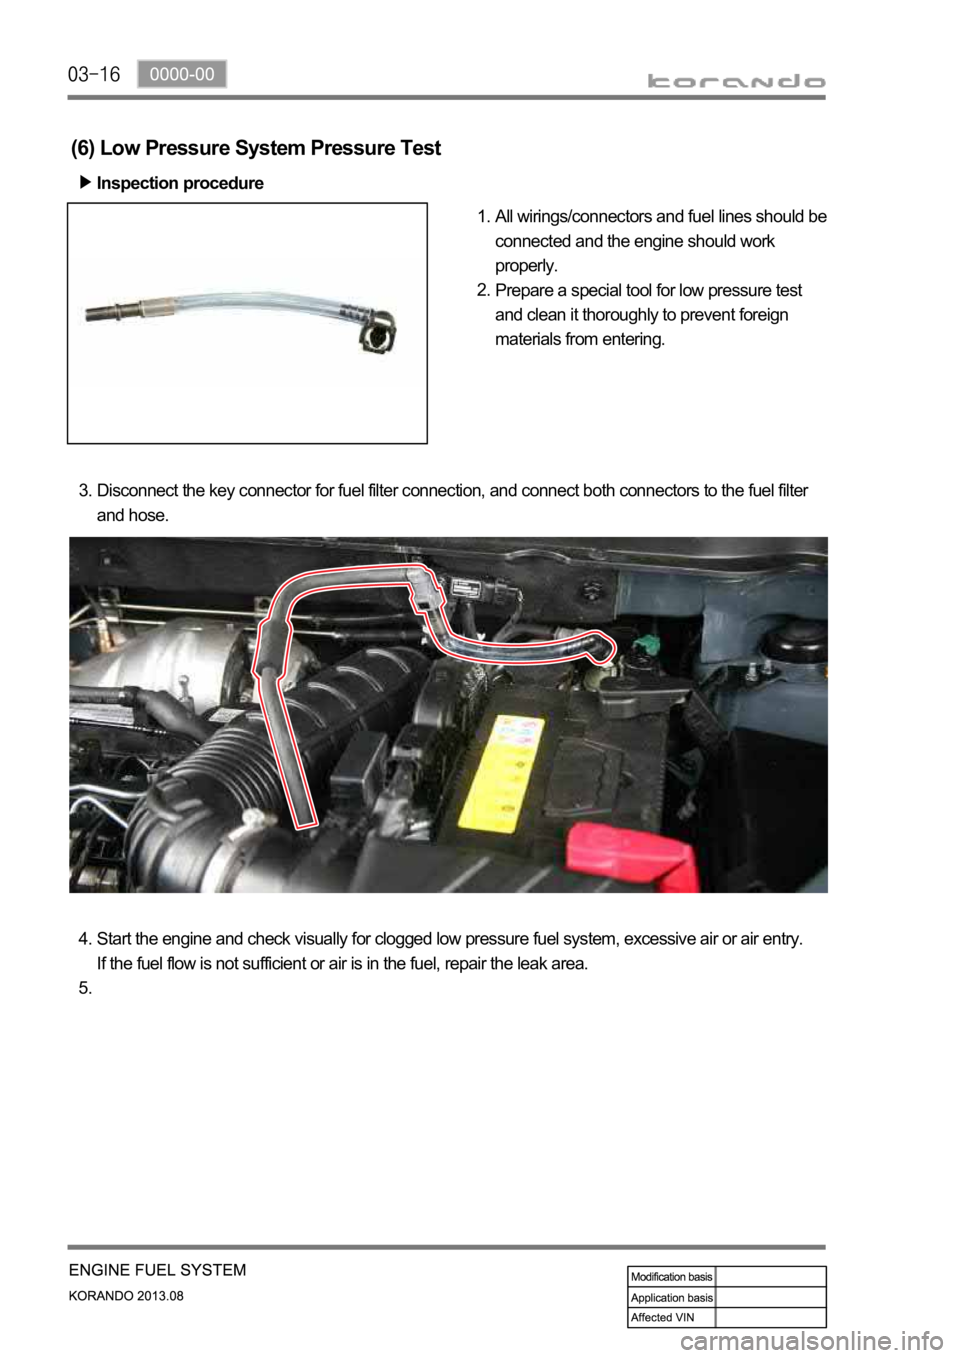 SSANGYONG KORANDO 2013  Service Manual (6) Low Pressure System Pressure Test
Inspection procedure
All wirings/connectors and fuel lines should be 
connected and the engine should work 
properly.
Prepare a special tool for low pressure test